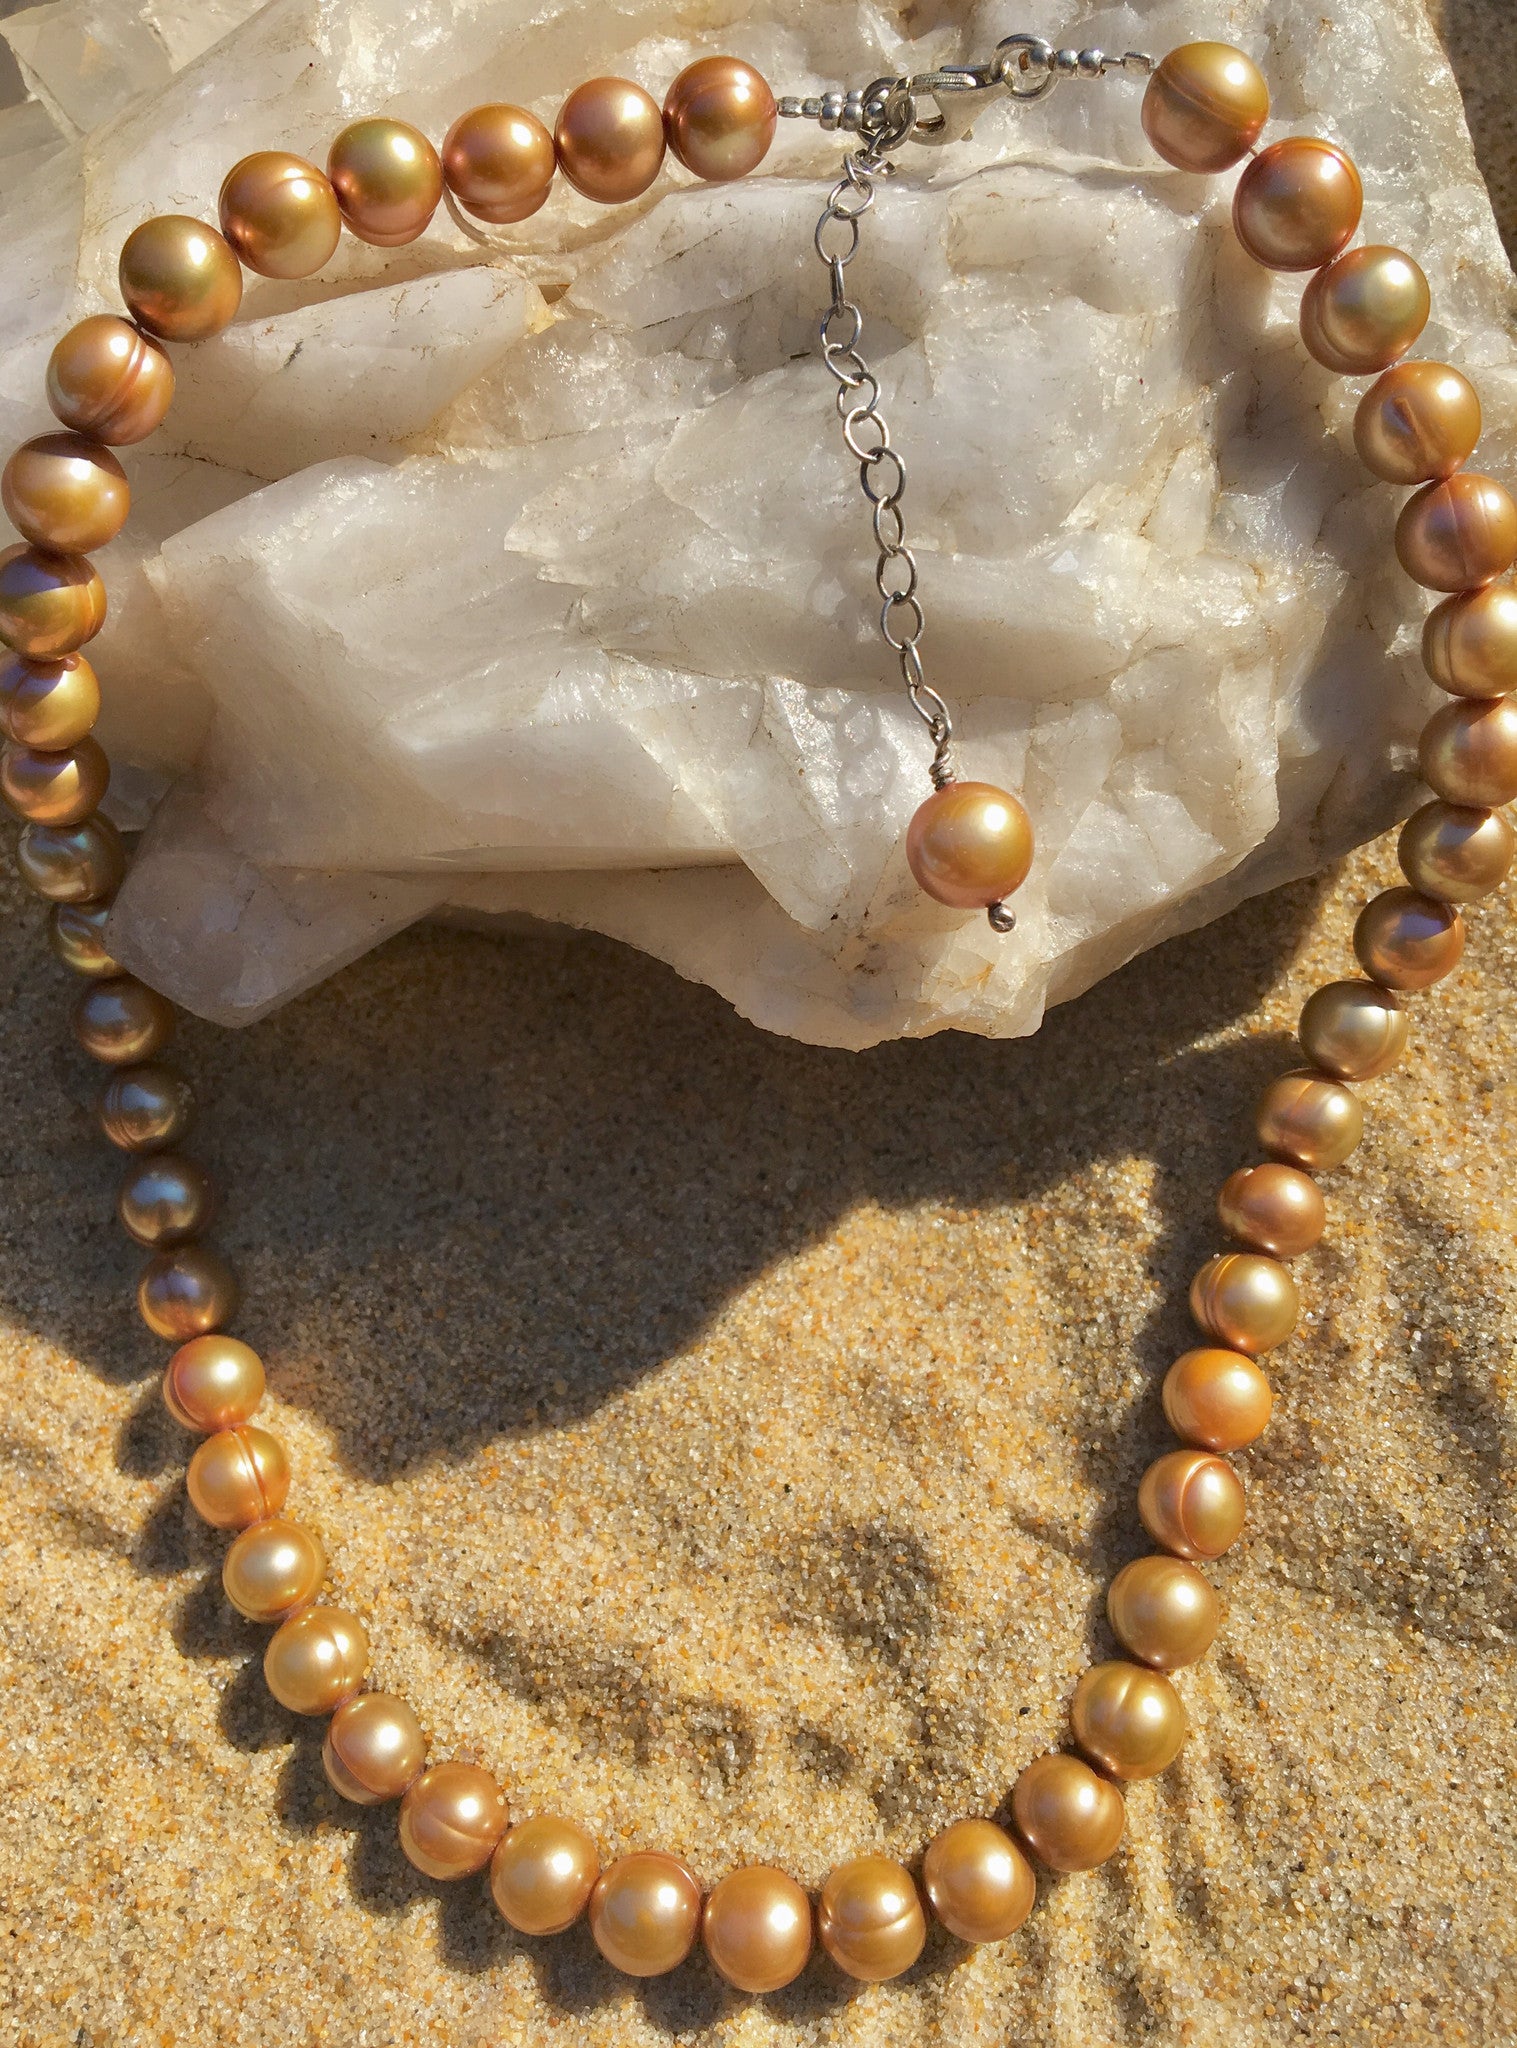 Pearl necklace with butterscotch pearls-Jenstones Jewelry